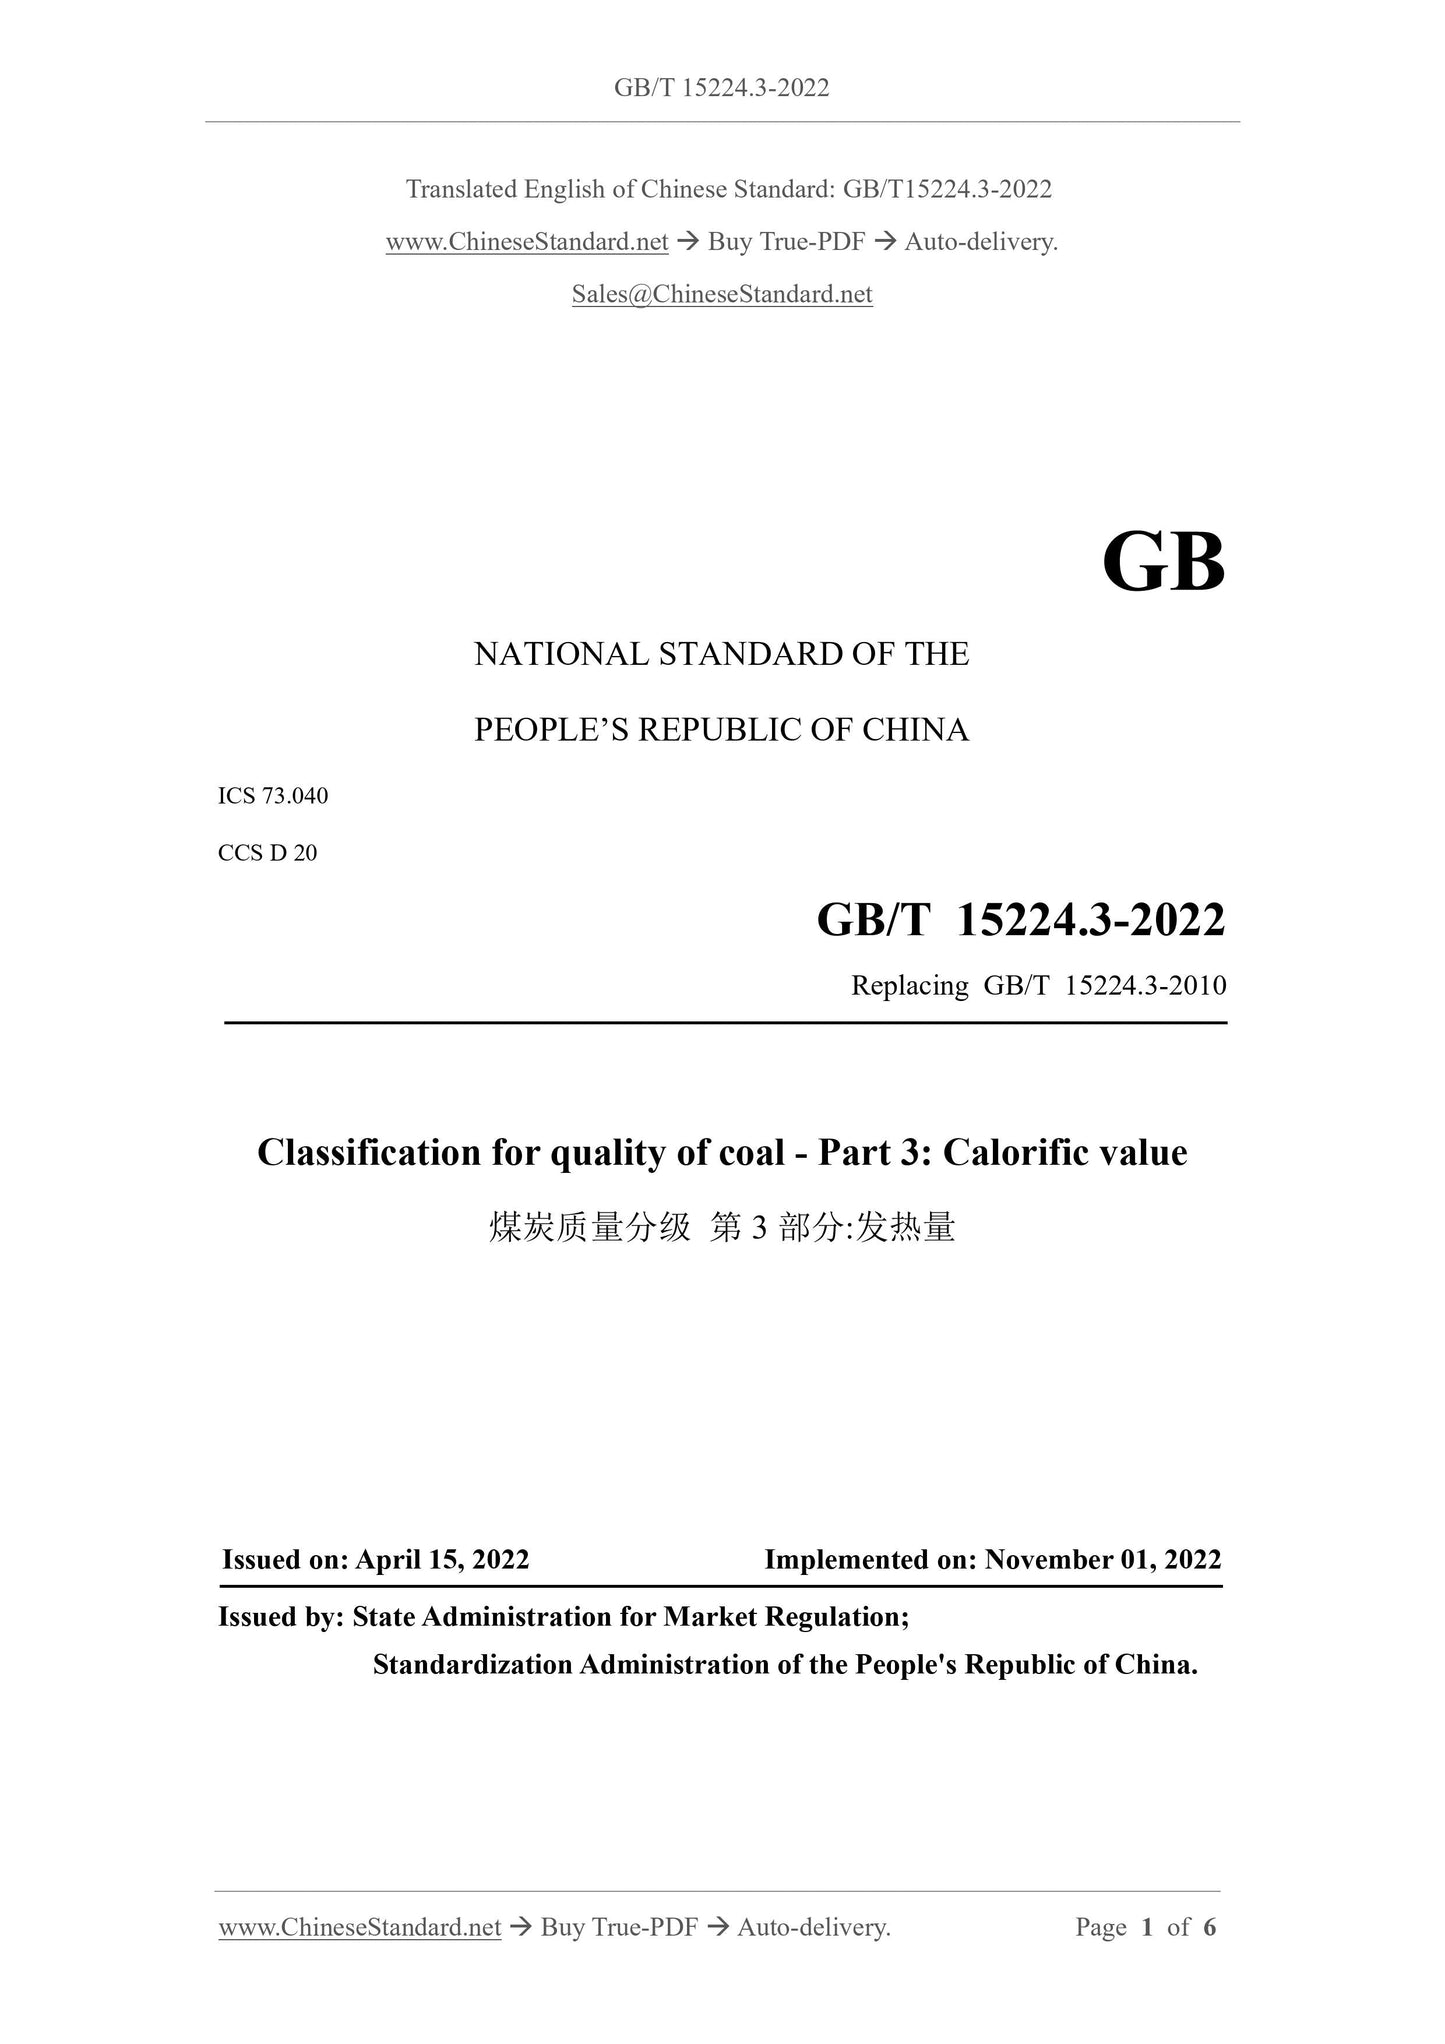 GB/T 15224.3-2022 Page 1